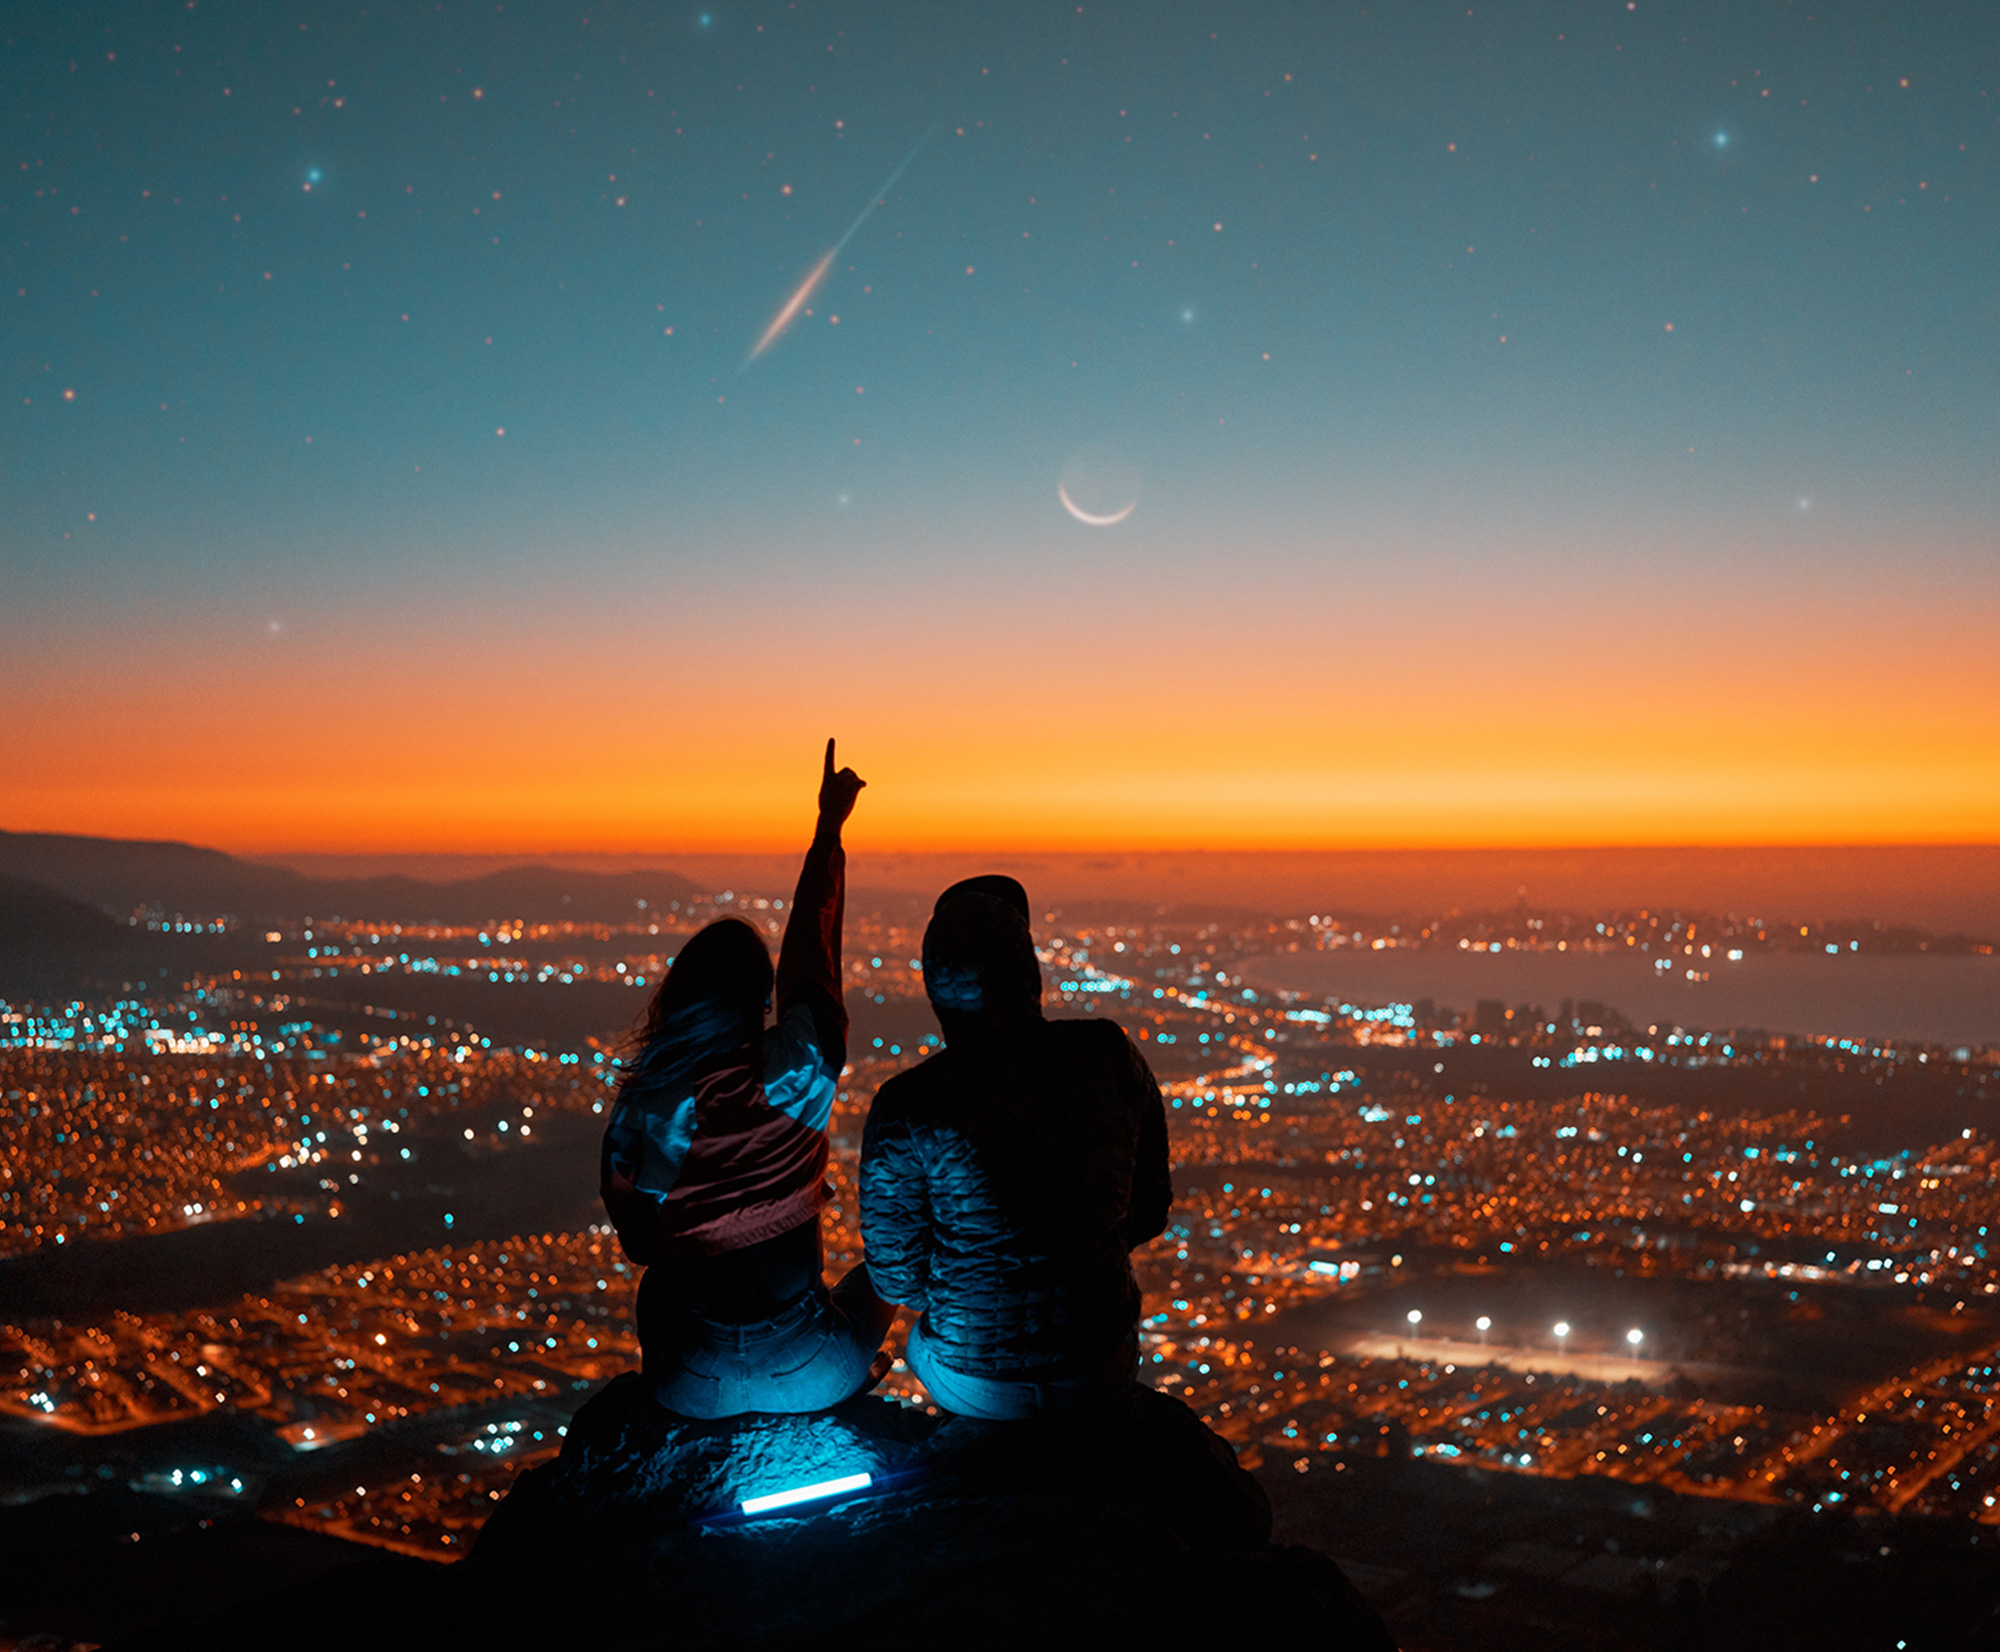 Two people looking at a shooting star